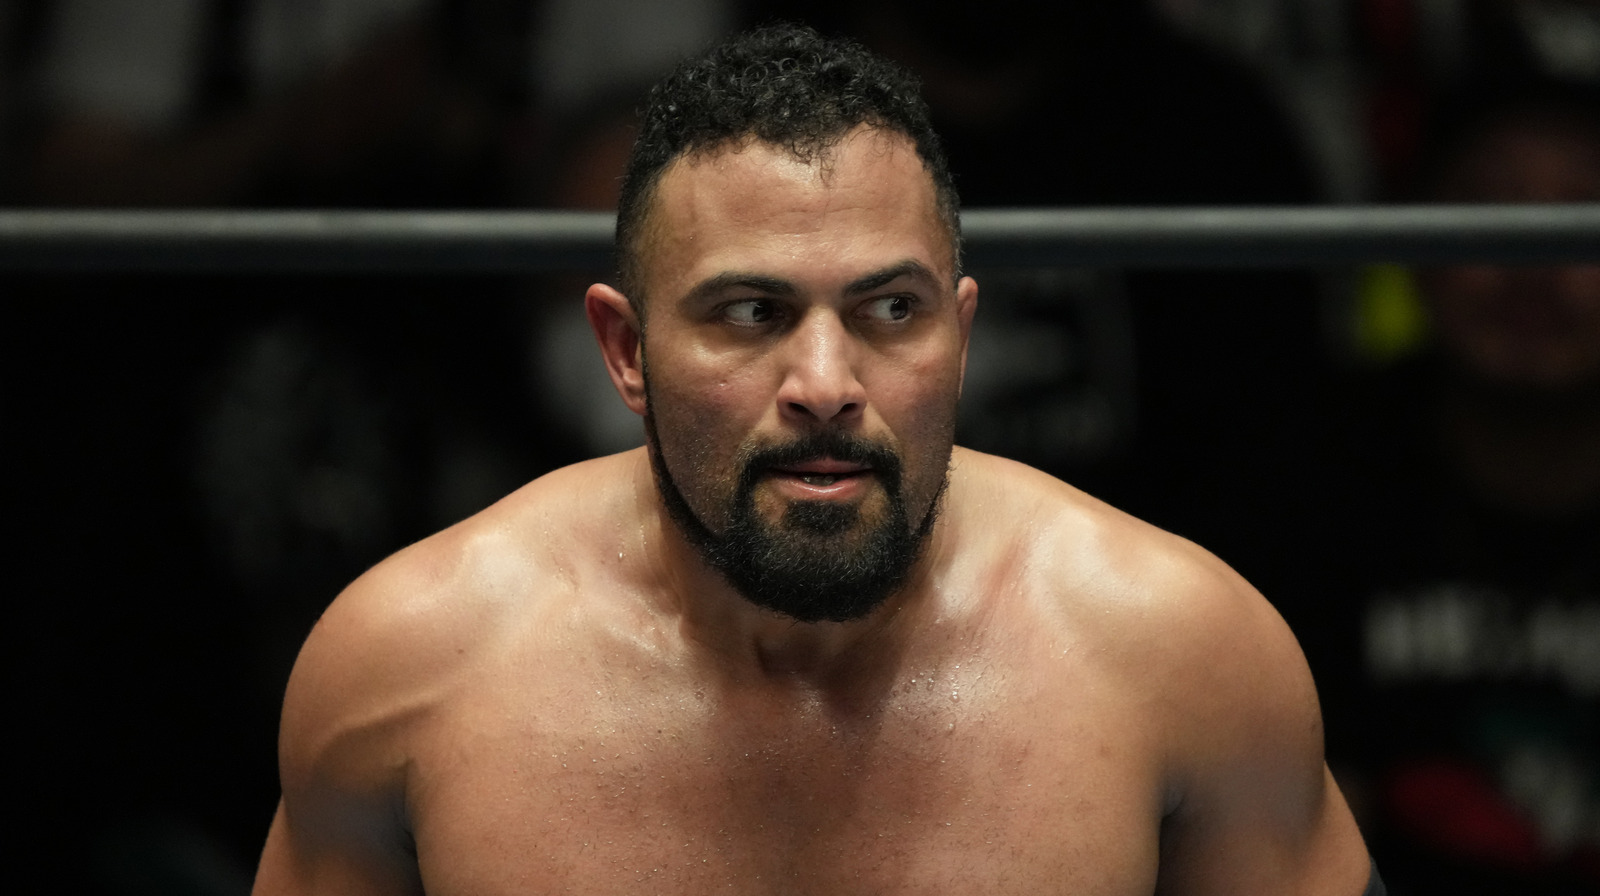 AEW And NJPW's Rocky Romero Discusses Contract Situation